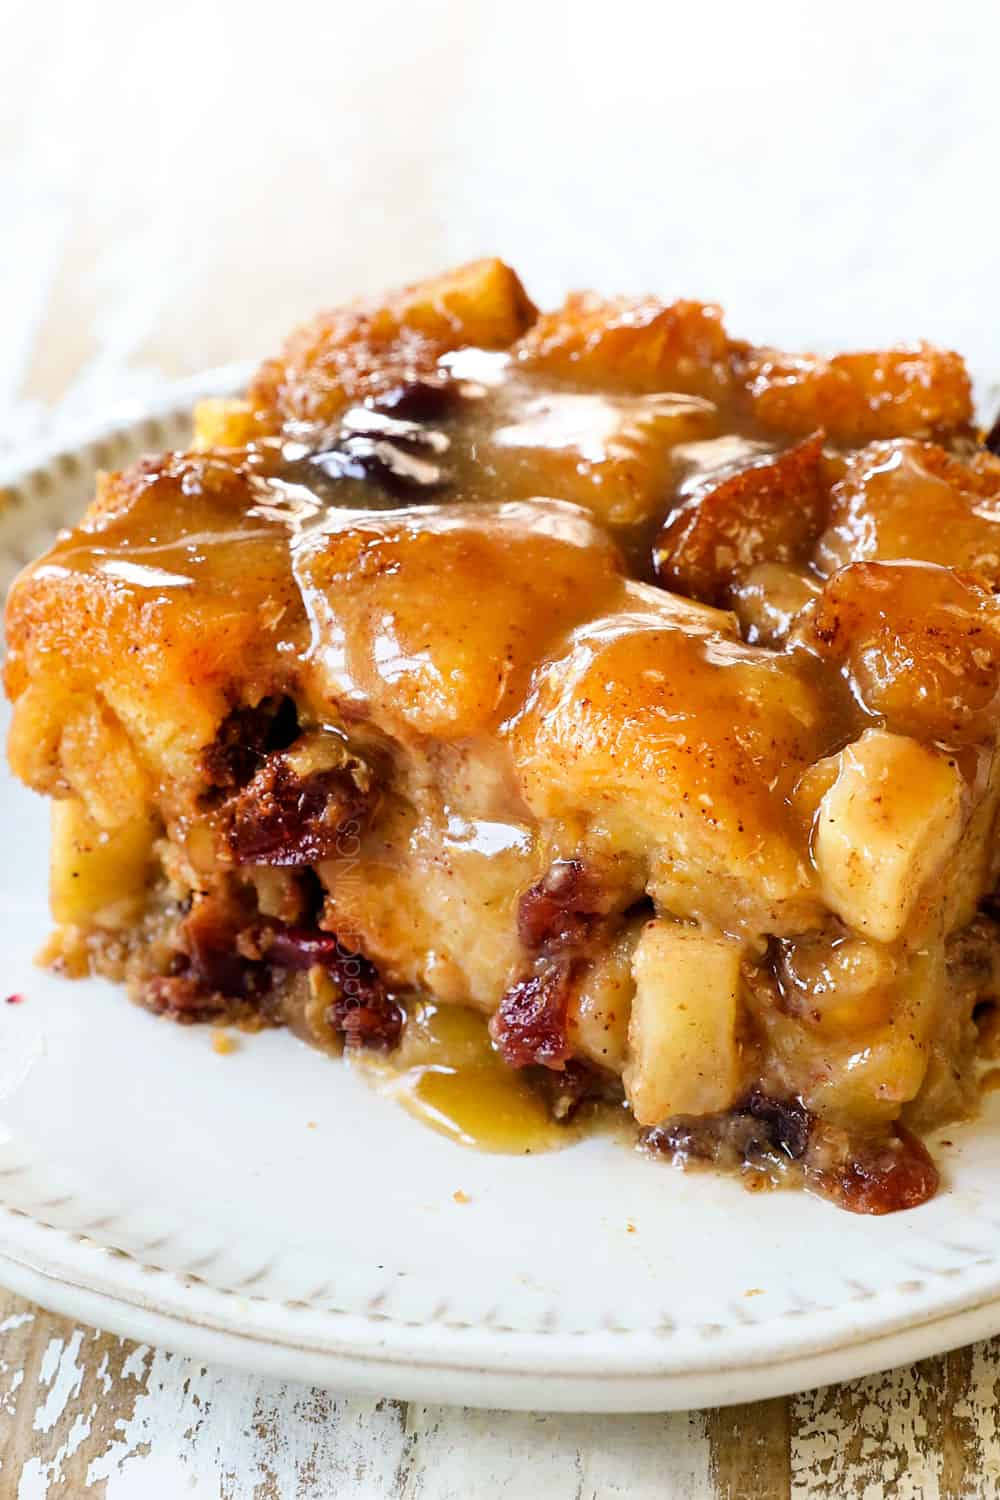 Apple Bread Pudding + Video (Make Ahead Instructions)